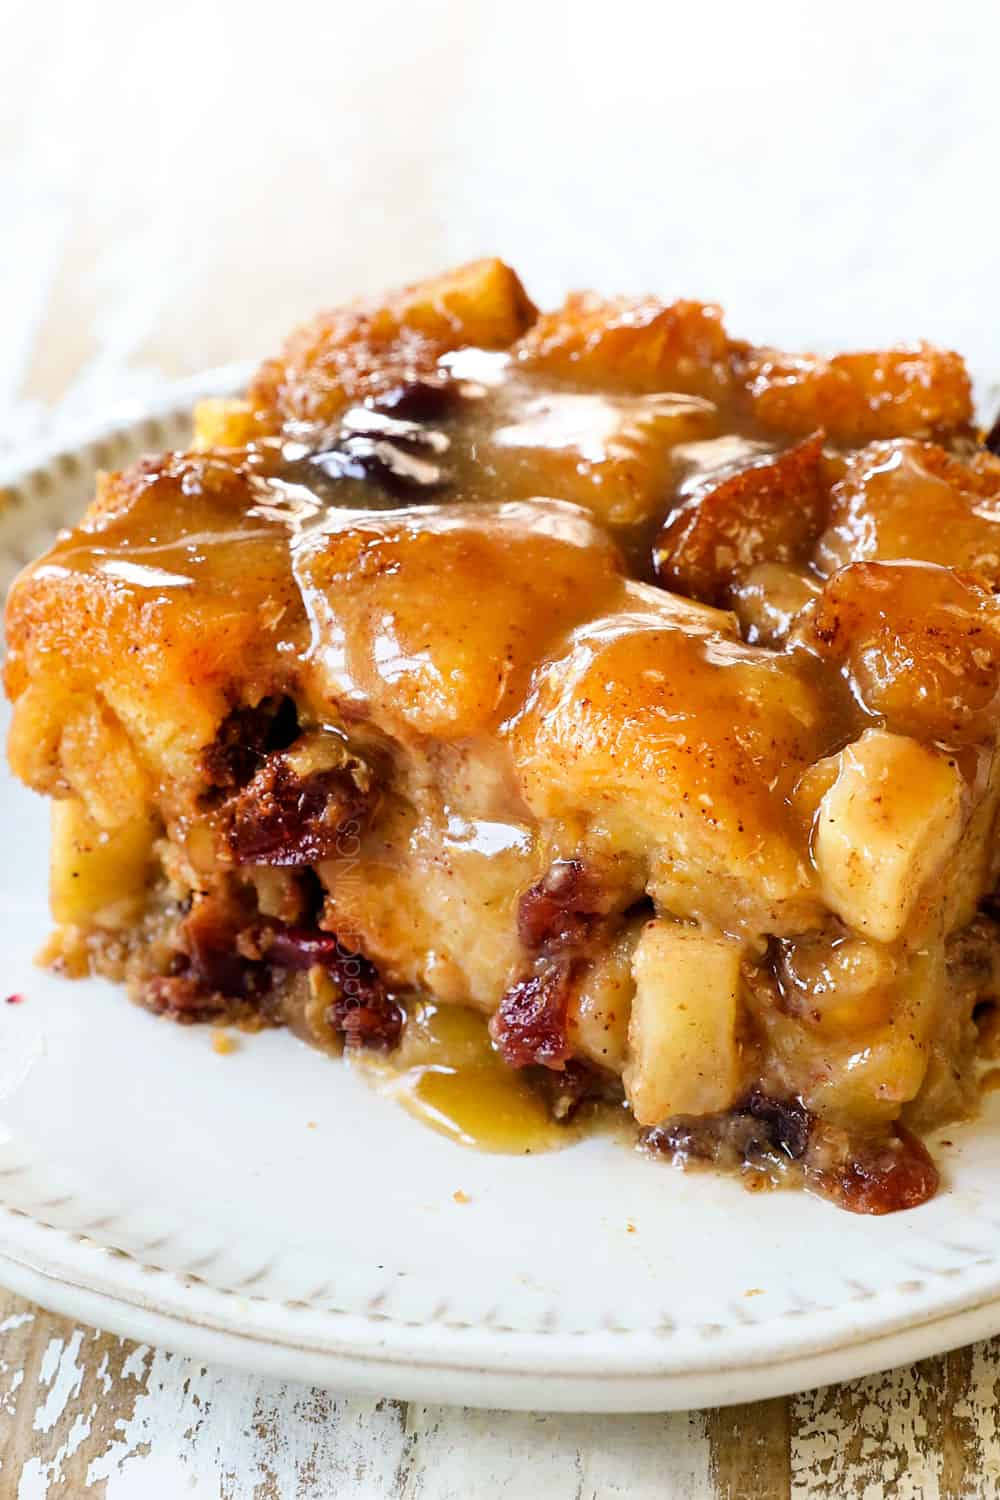 Apple Bread Pudding + Video (Make Ahead Instructions)